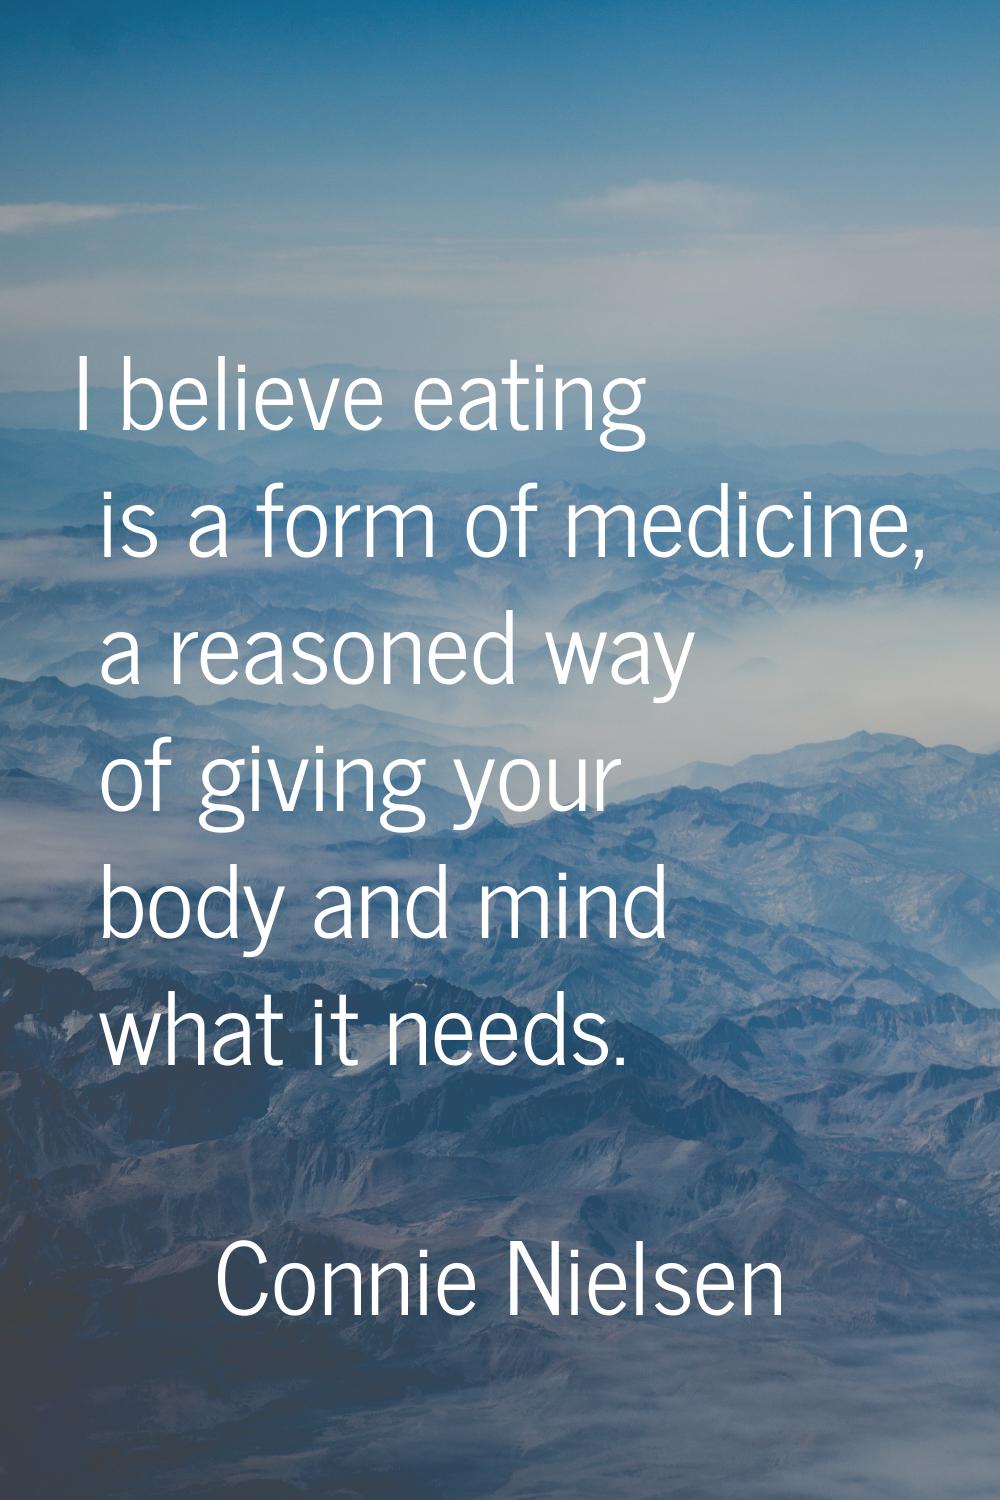 I believe eating is a form of medicine, a reasoned way of giving your body and mind what it needs.